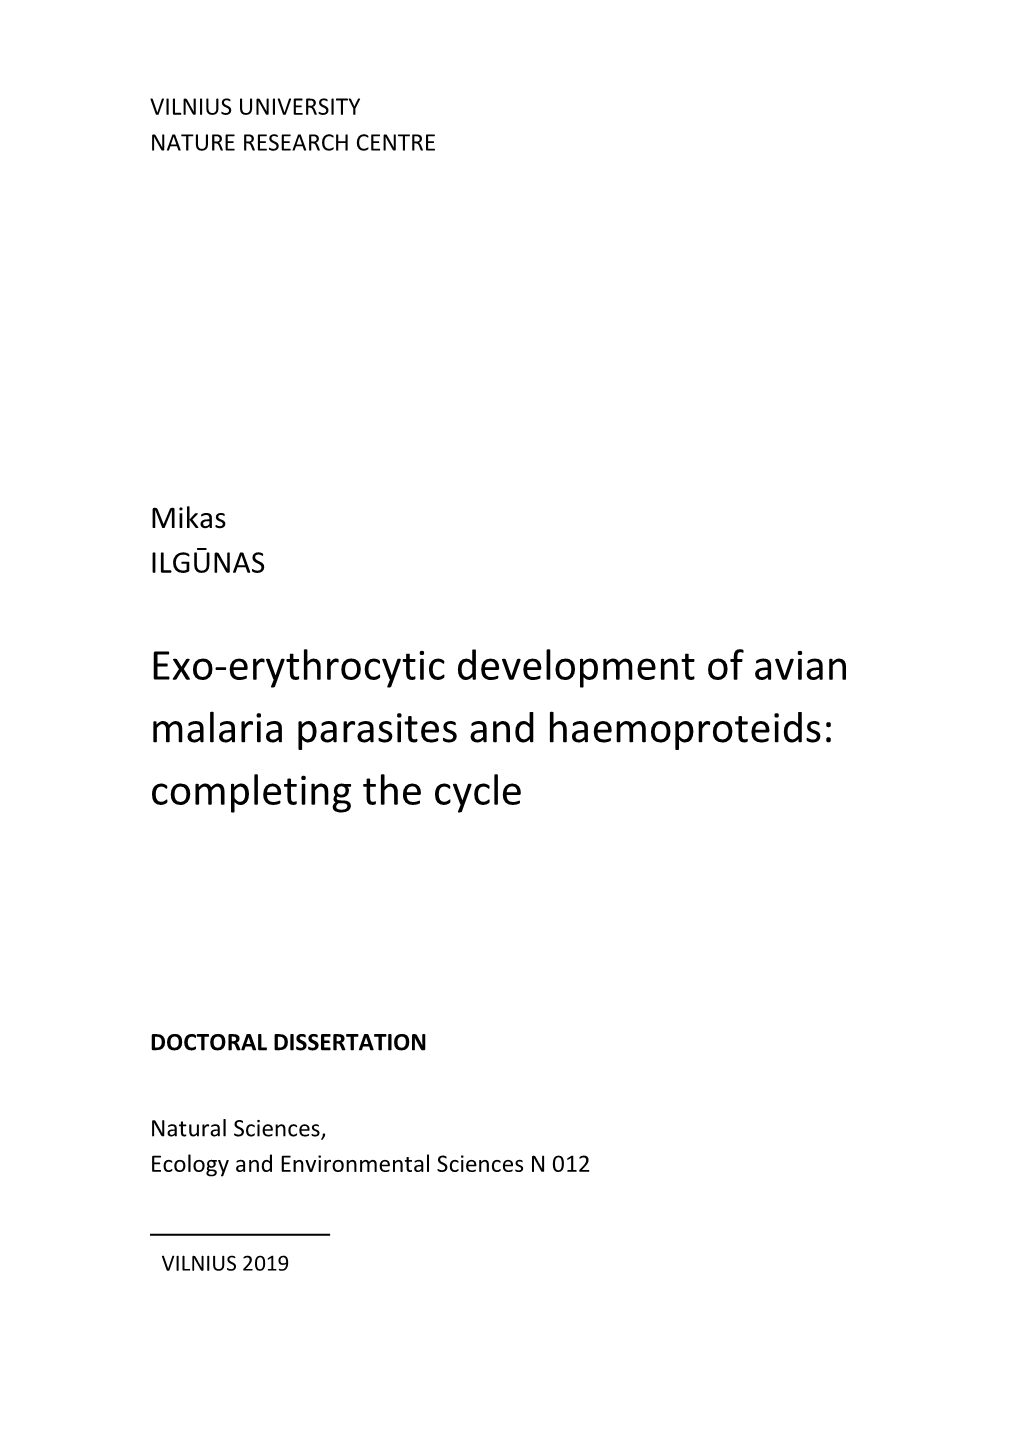 Exo-Erythrocytic Development of Avian Malaria Parasites and Haemoproteids: Completing the Cycle